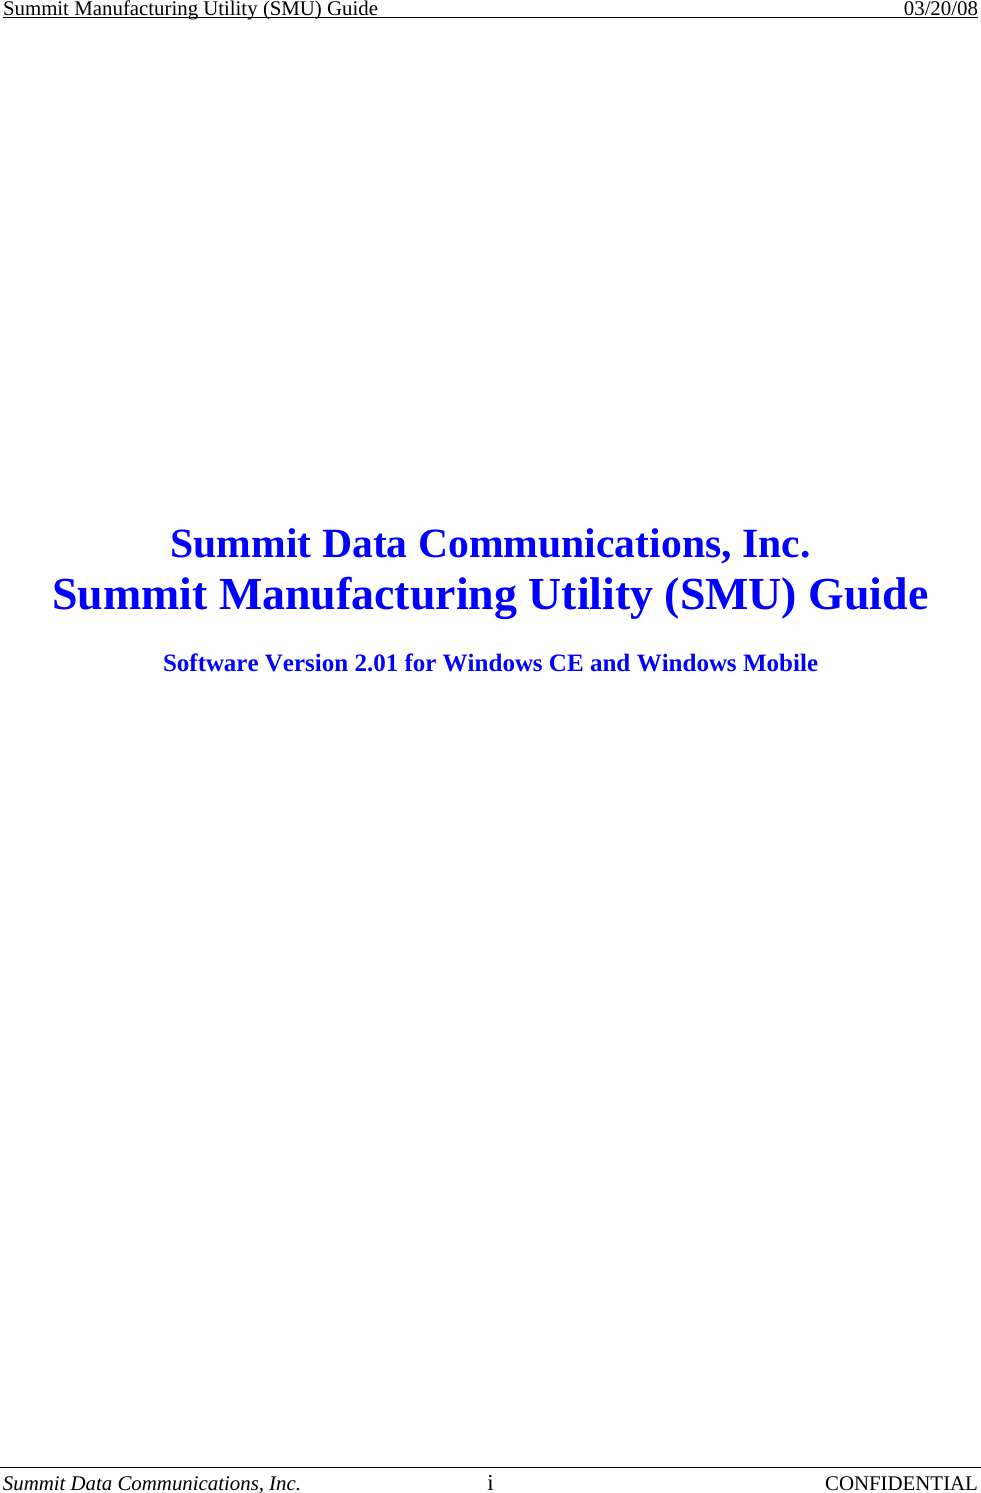 Summit Manufacturing Utility (SMU) Guide    03/20/08 Summit Data Communications, Inc.  i CONFIDENTIAL                  Summit Data Communications, Inc. Summit Manufacturing Utility (SMU) Guide  Software Version 2.01 for Windows CE and Windows Mobile   